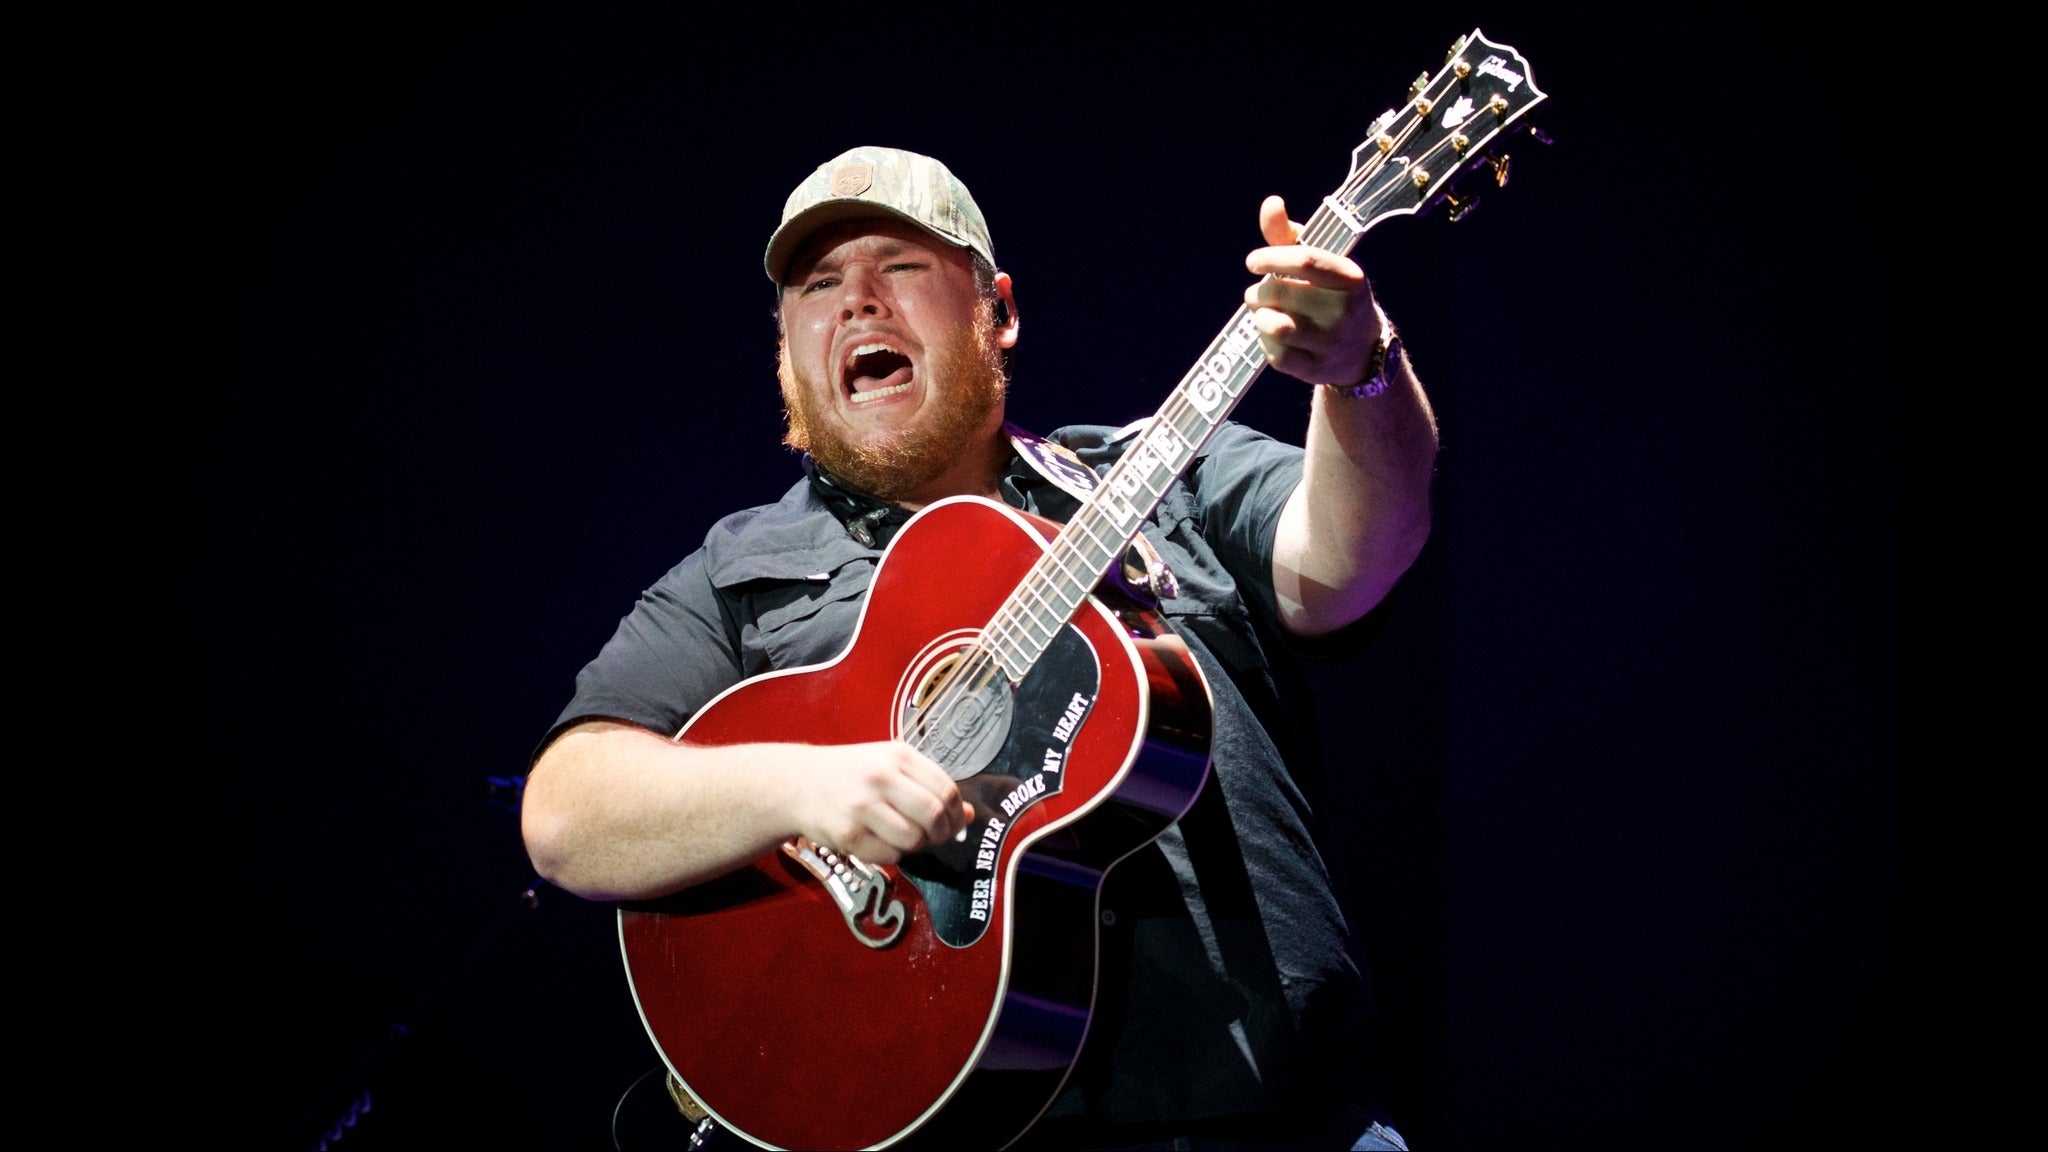 Image used with permission from Ticketmaster | Luke Combs tickets